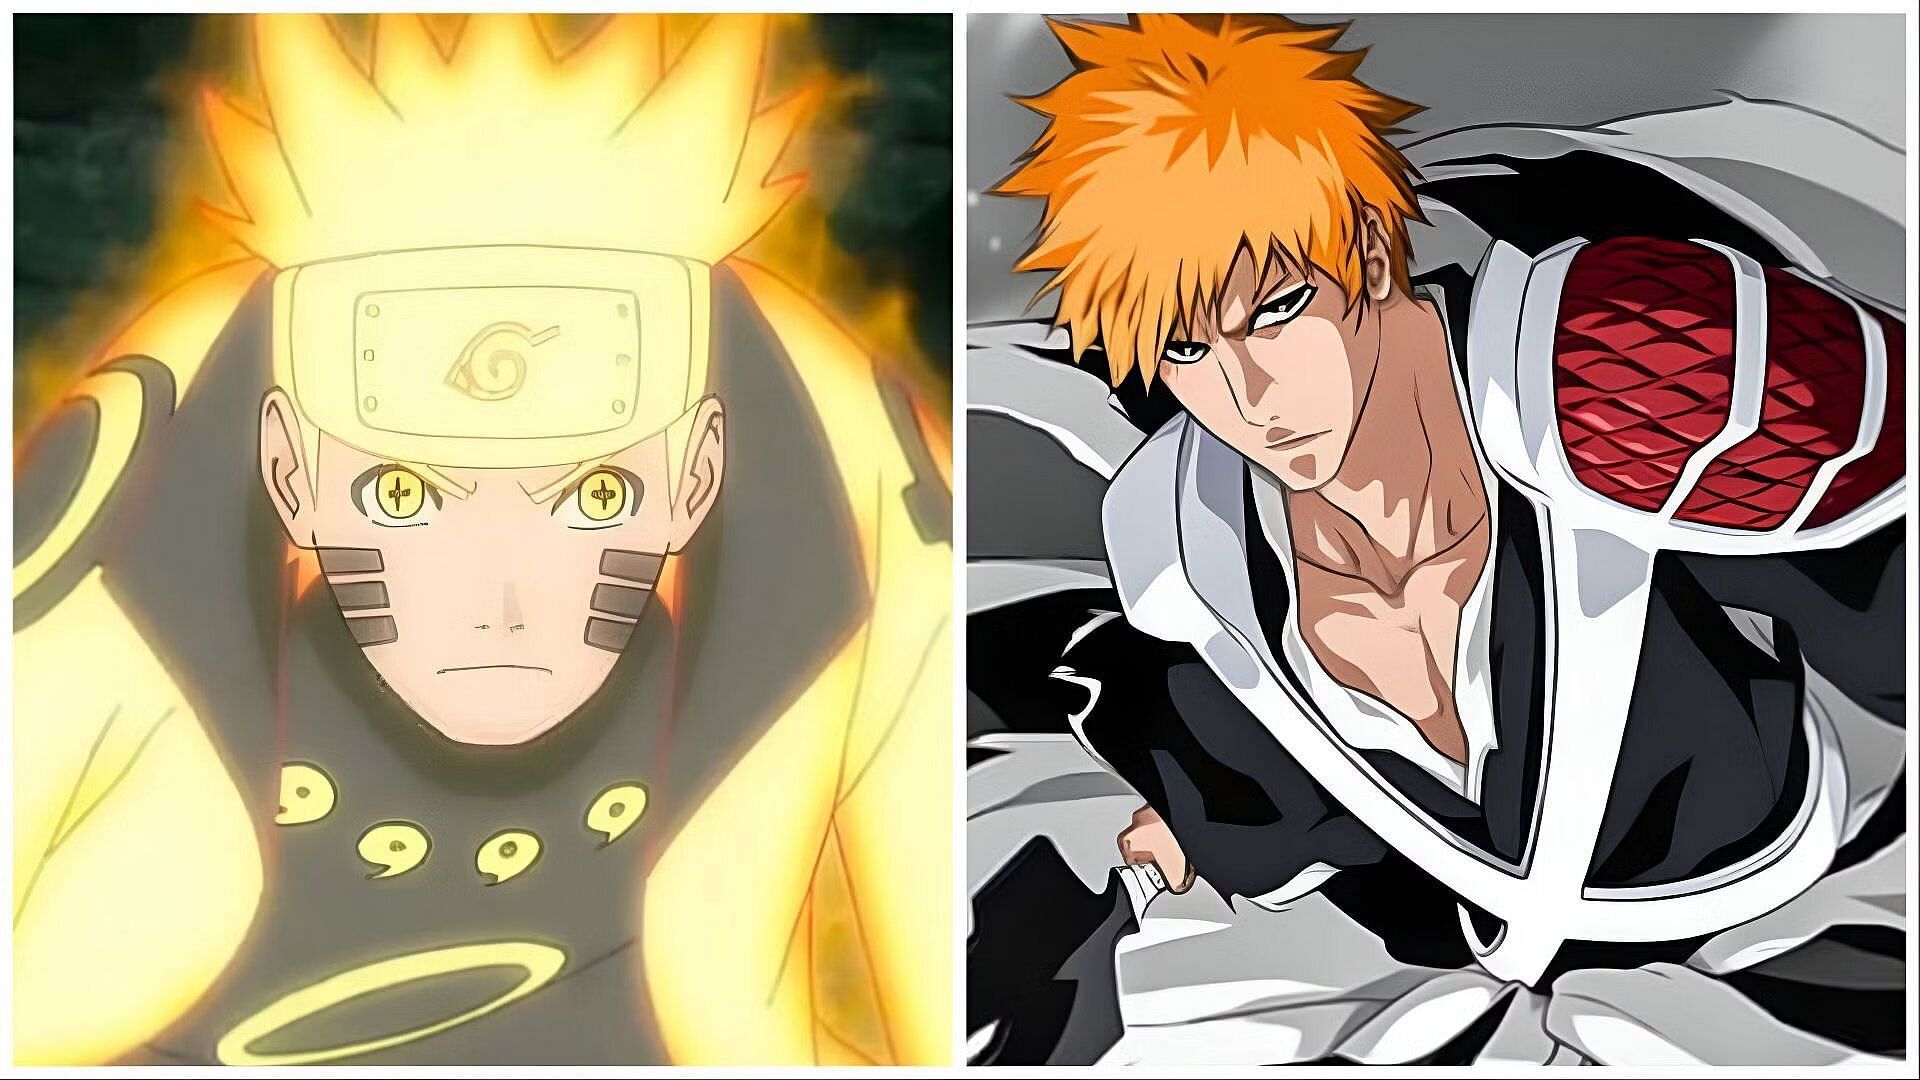 Naruto and Bleach go to war over their main characters